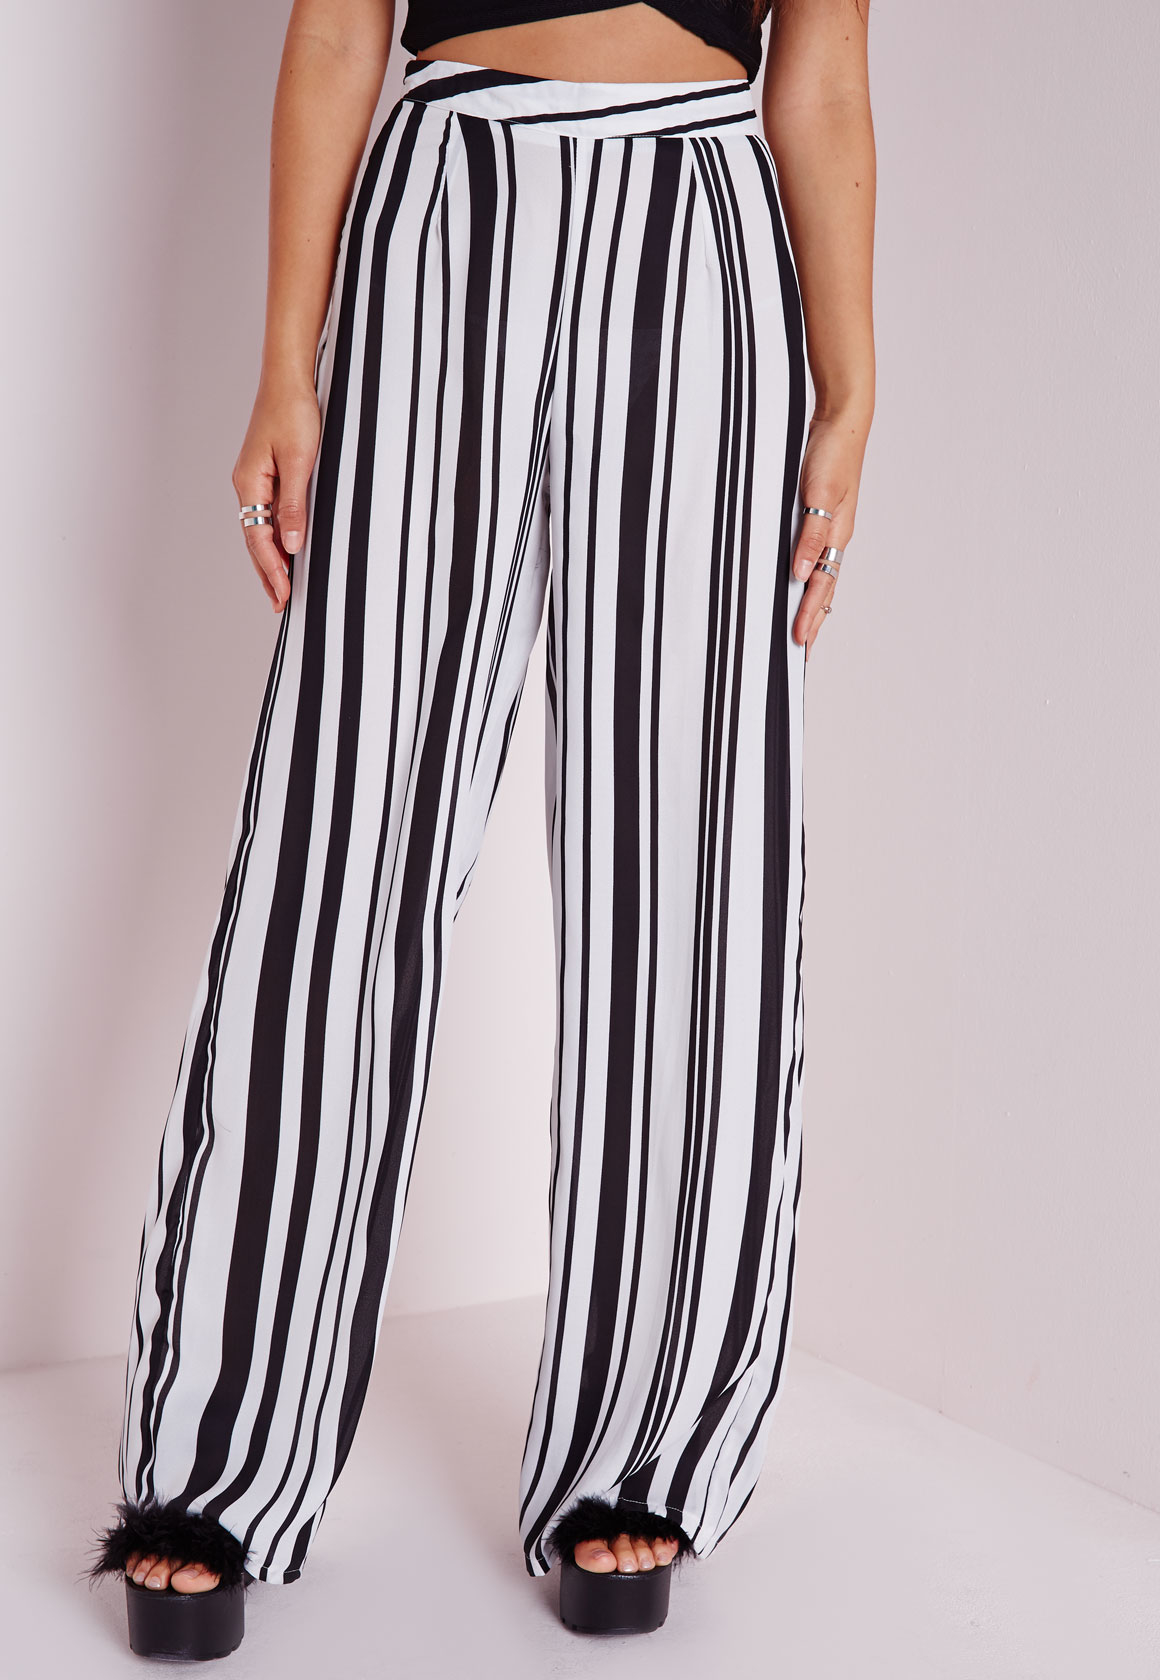 Lyst - Missguided Tall Striped Wide Leg Pants Monochrome in Black